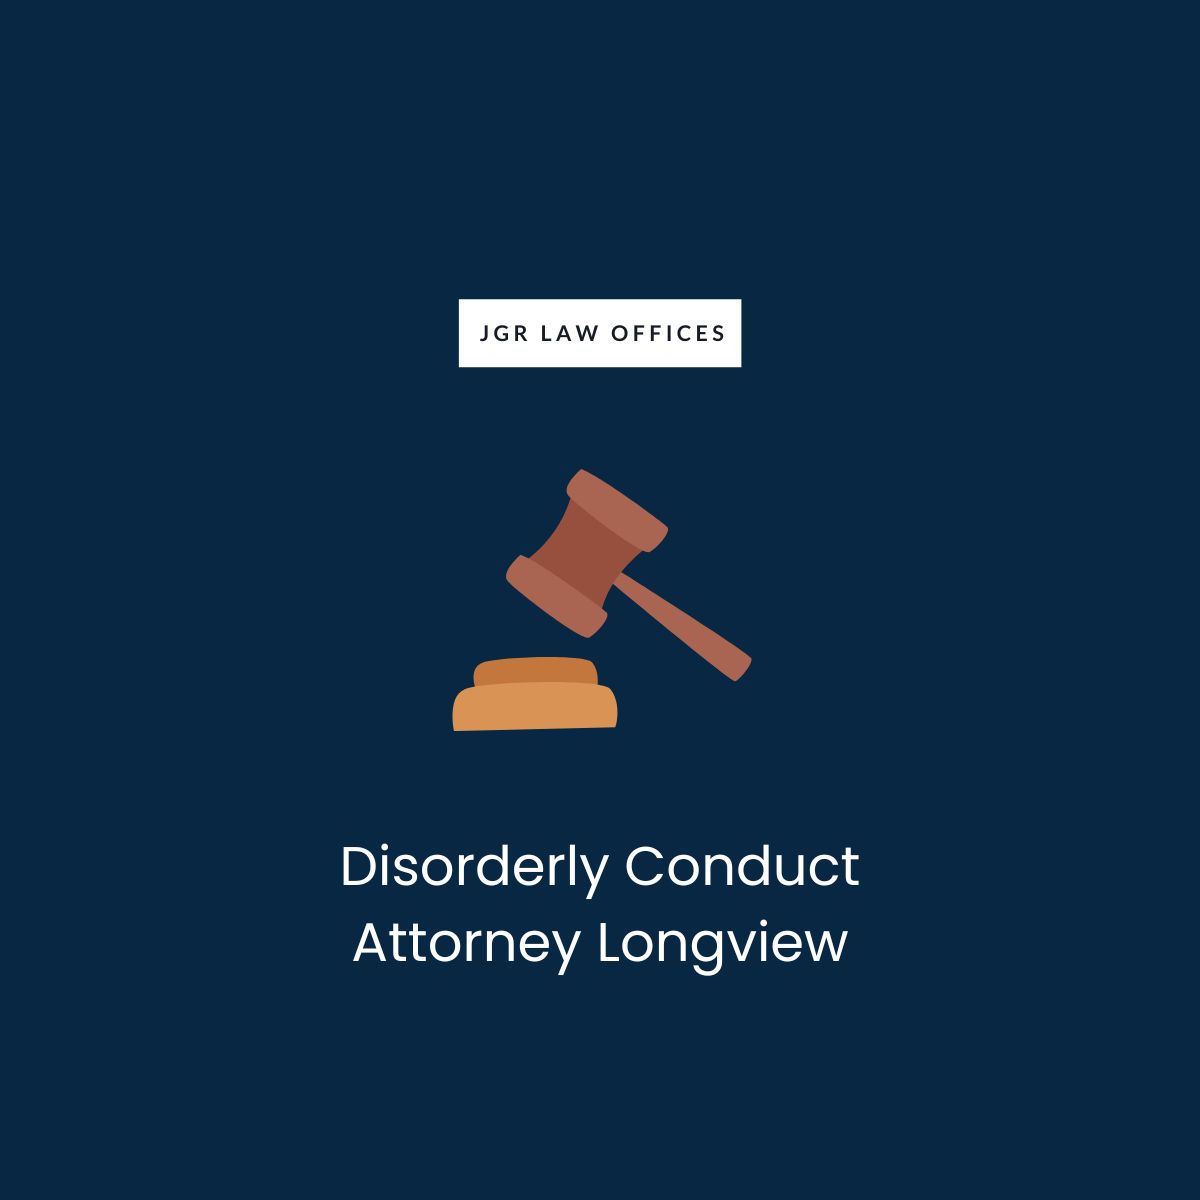 Disorderly Conduct Attorney Longview